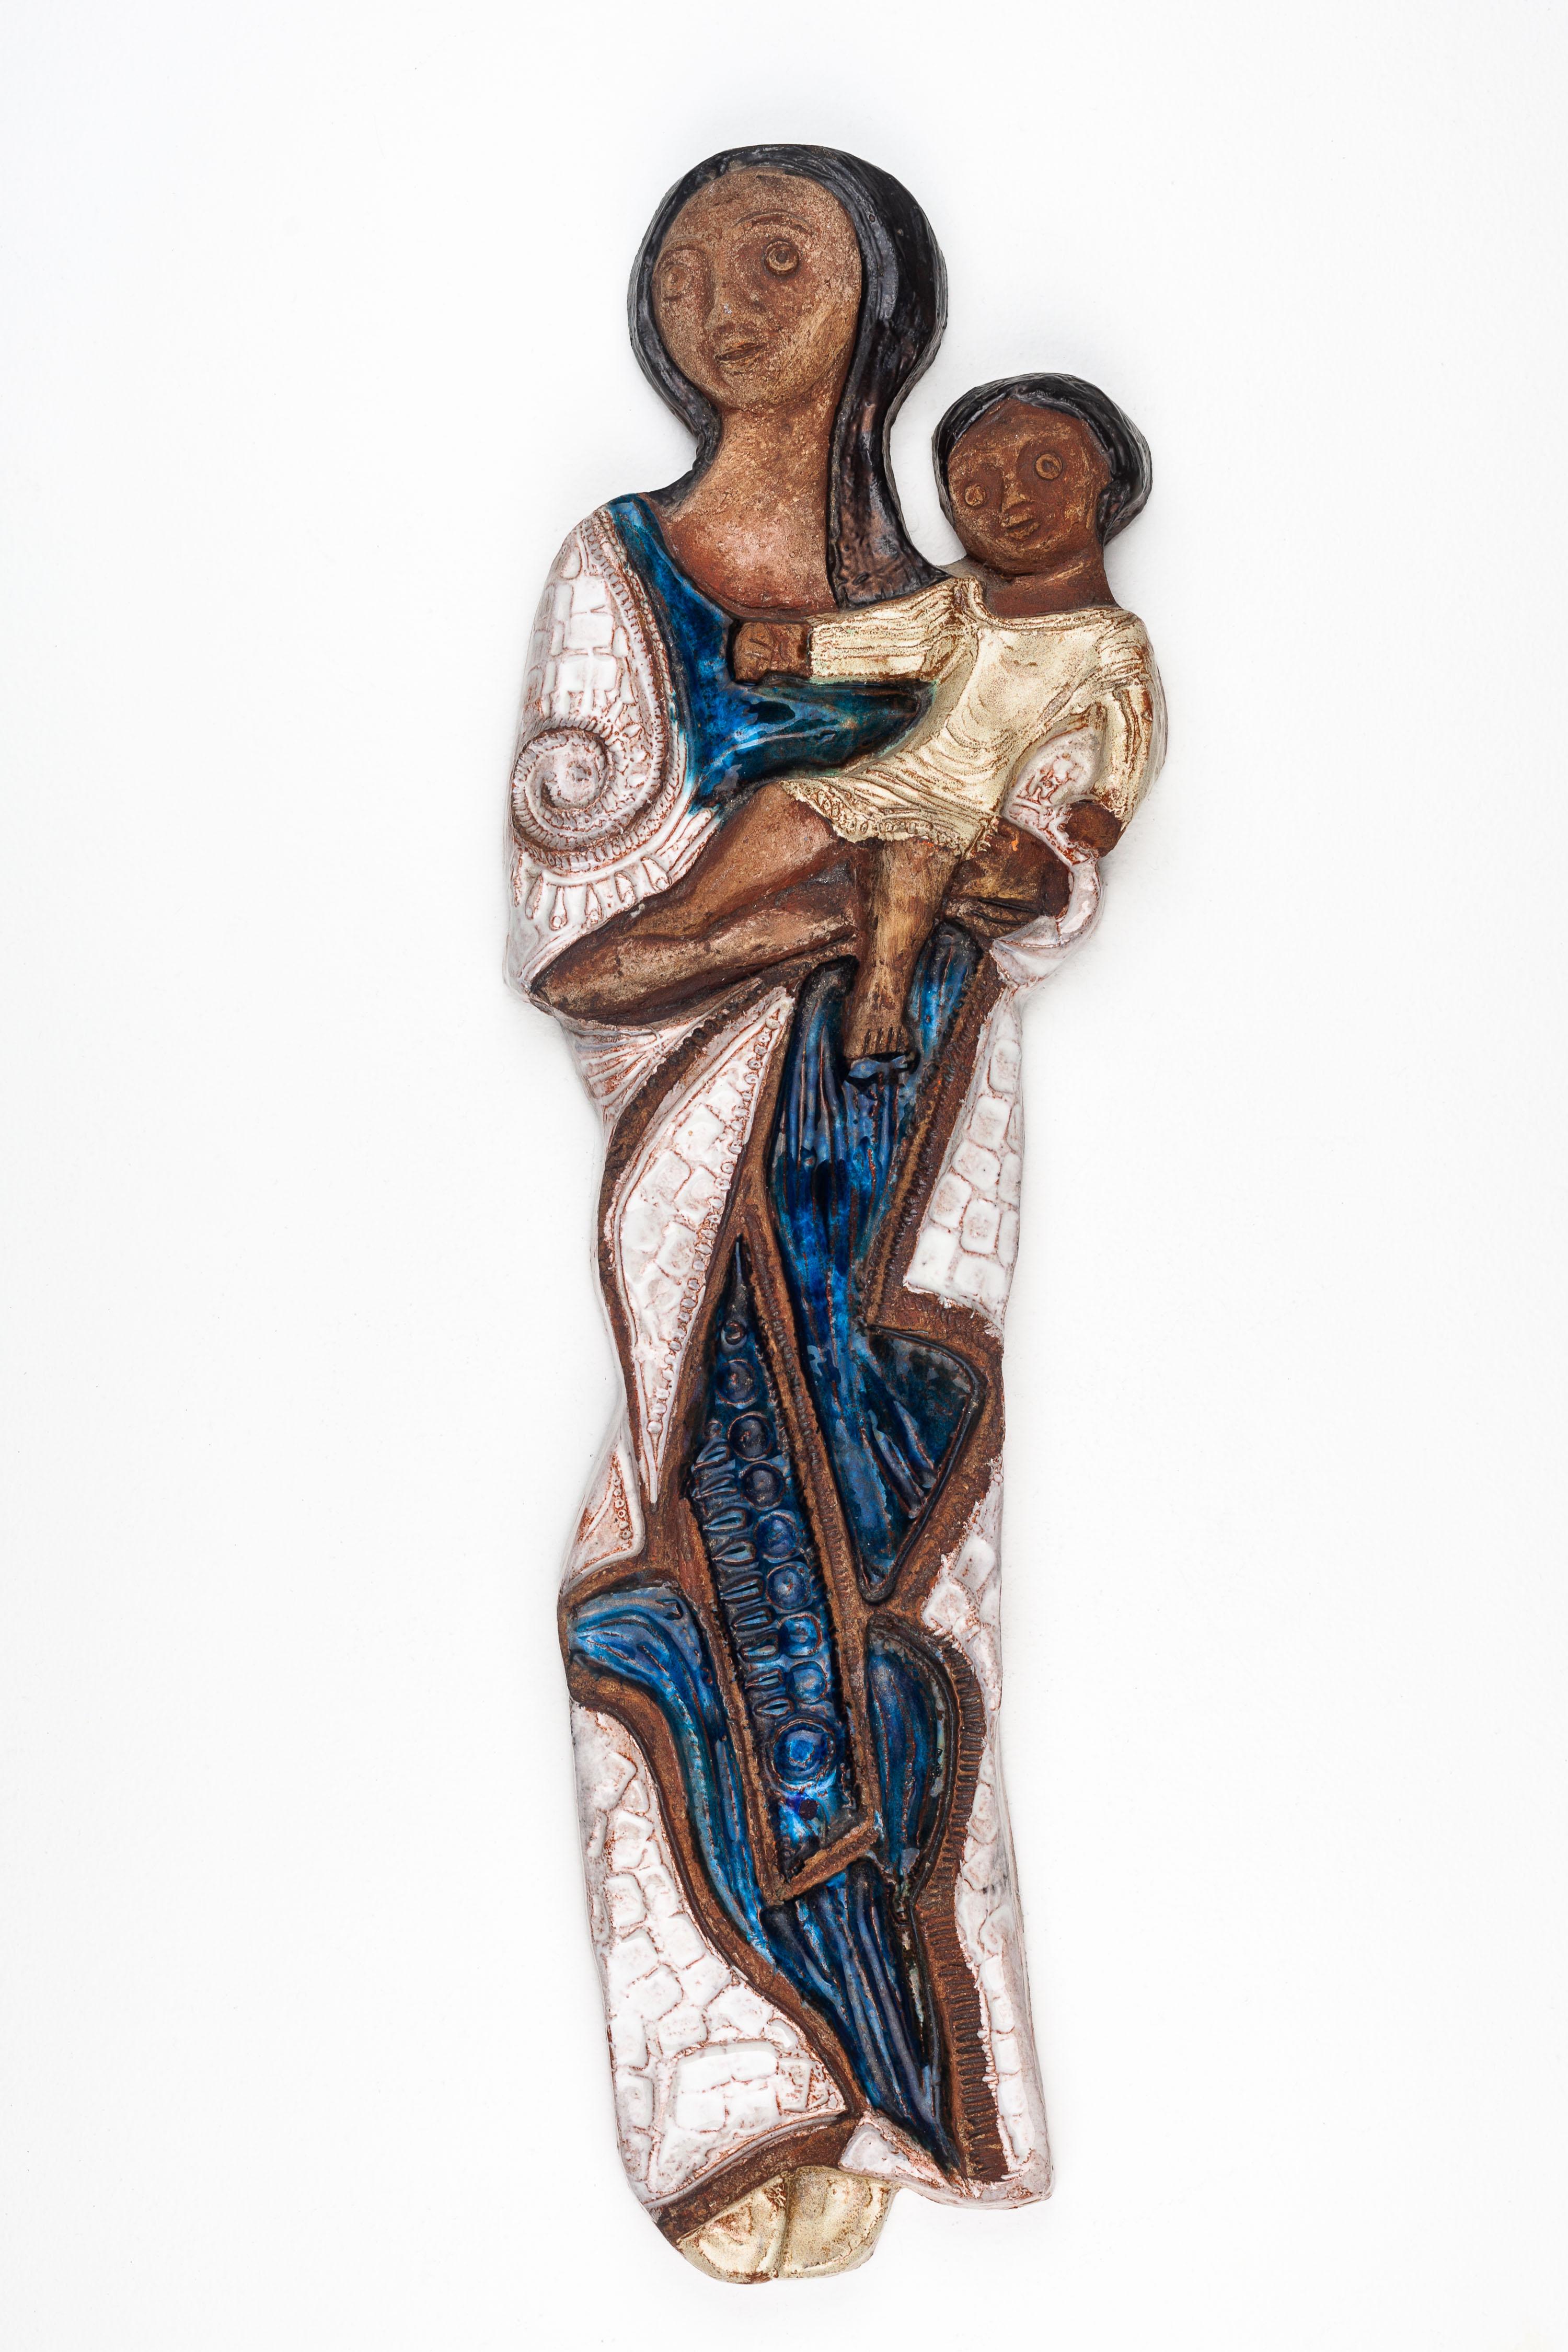 This Madonna and Child sculpture is a distinctive piece of mid-century modern ceramic art, handcrafted by a European studio pottery artist. The sculpture presents a stylized depiction of the Virgin Mary and Child Jesus, a subject deeply rooted in